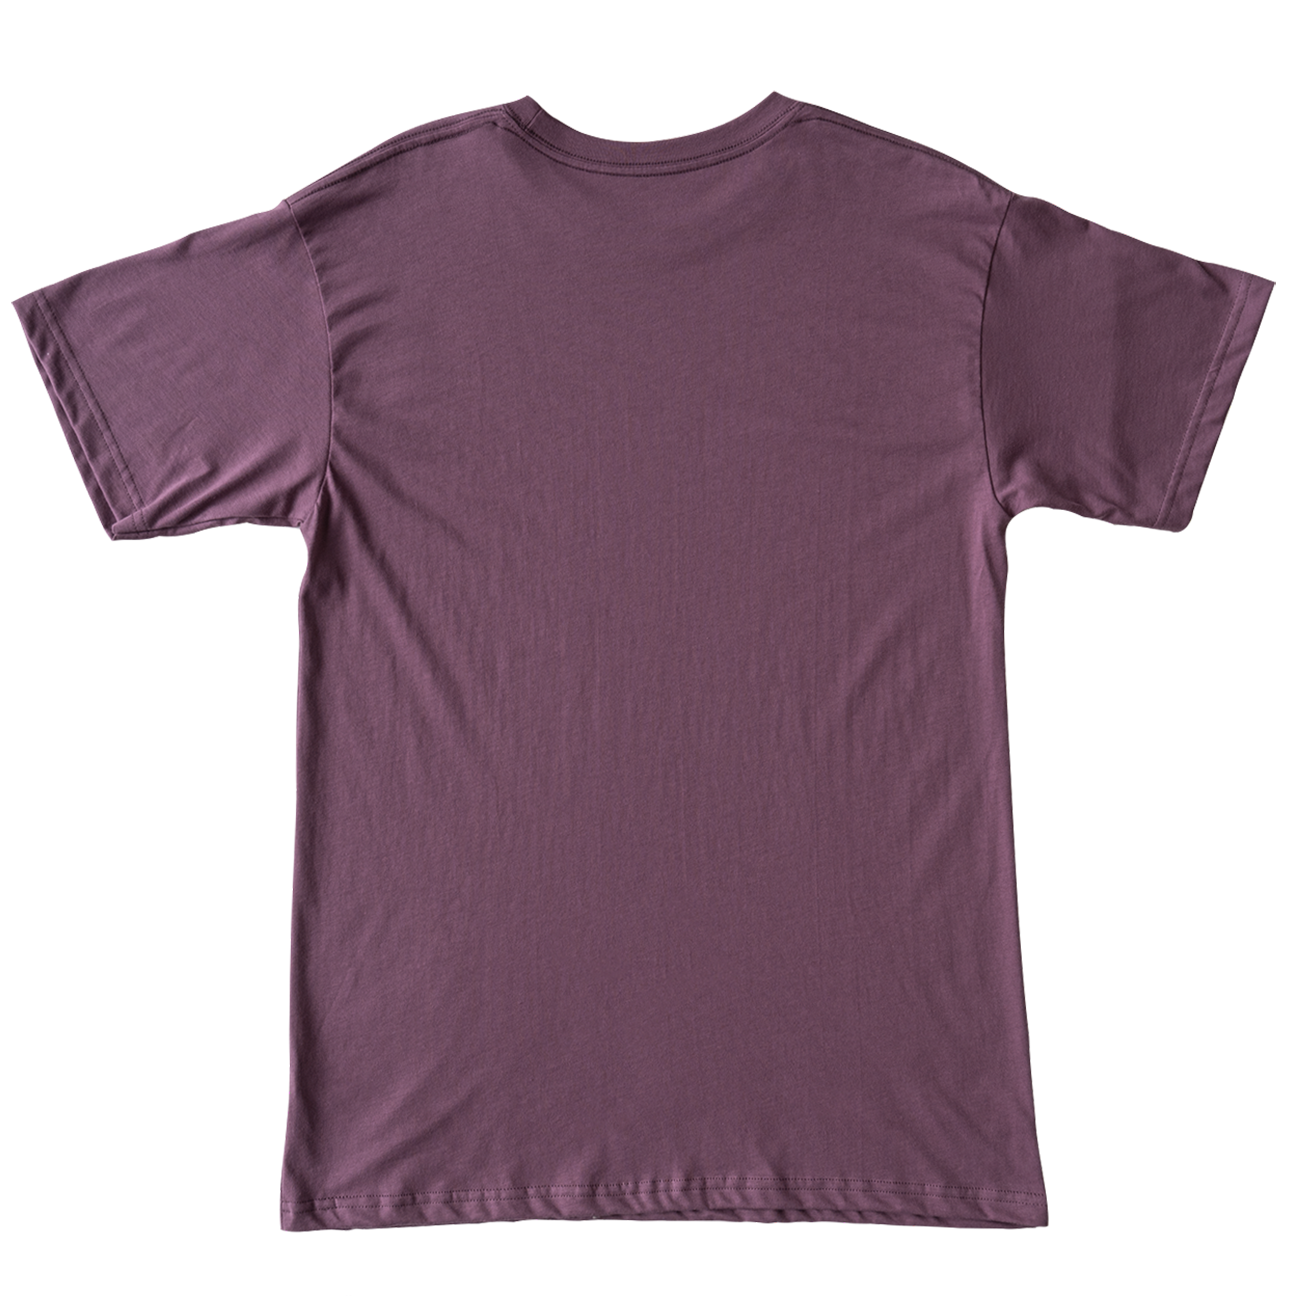 Nature Backs Short Sleeve 100% Organic Cotton T-Shirt | Minimalist Berry Short Sleeve made with Eco-Friendly Fibers Sustainably made in the USA 